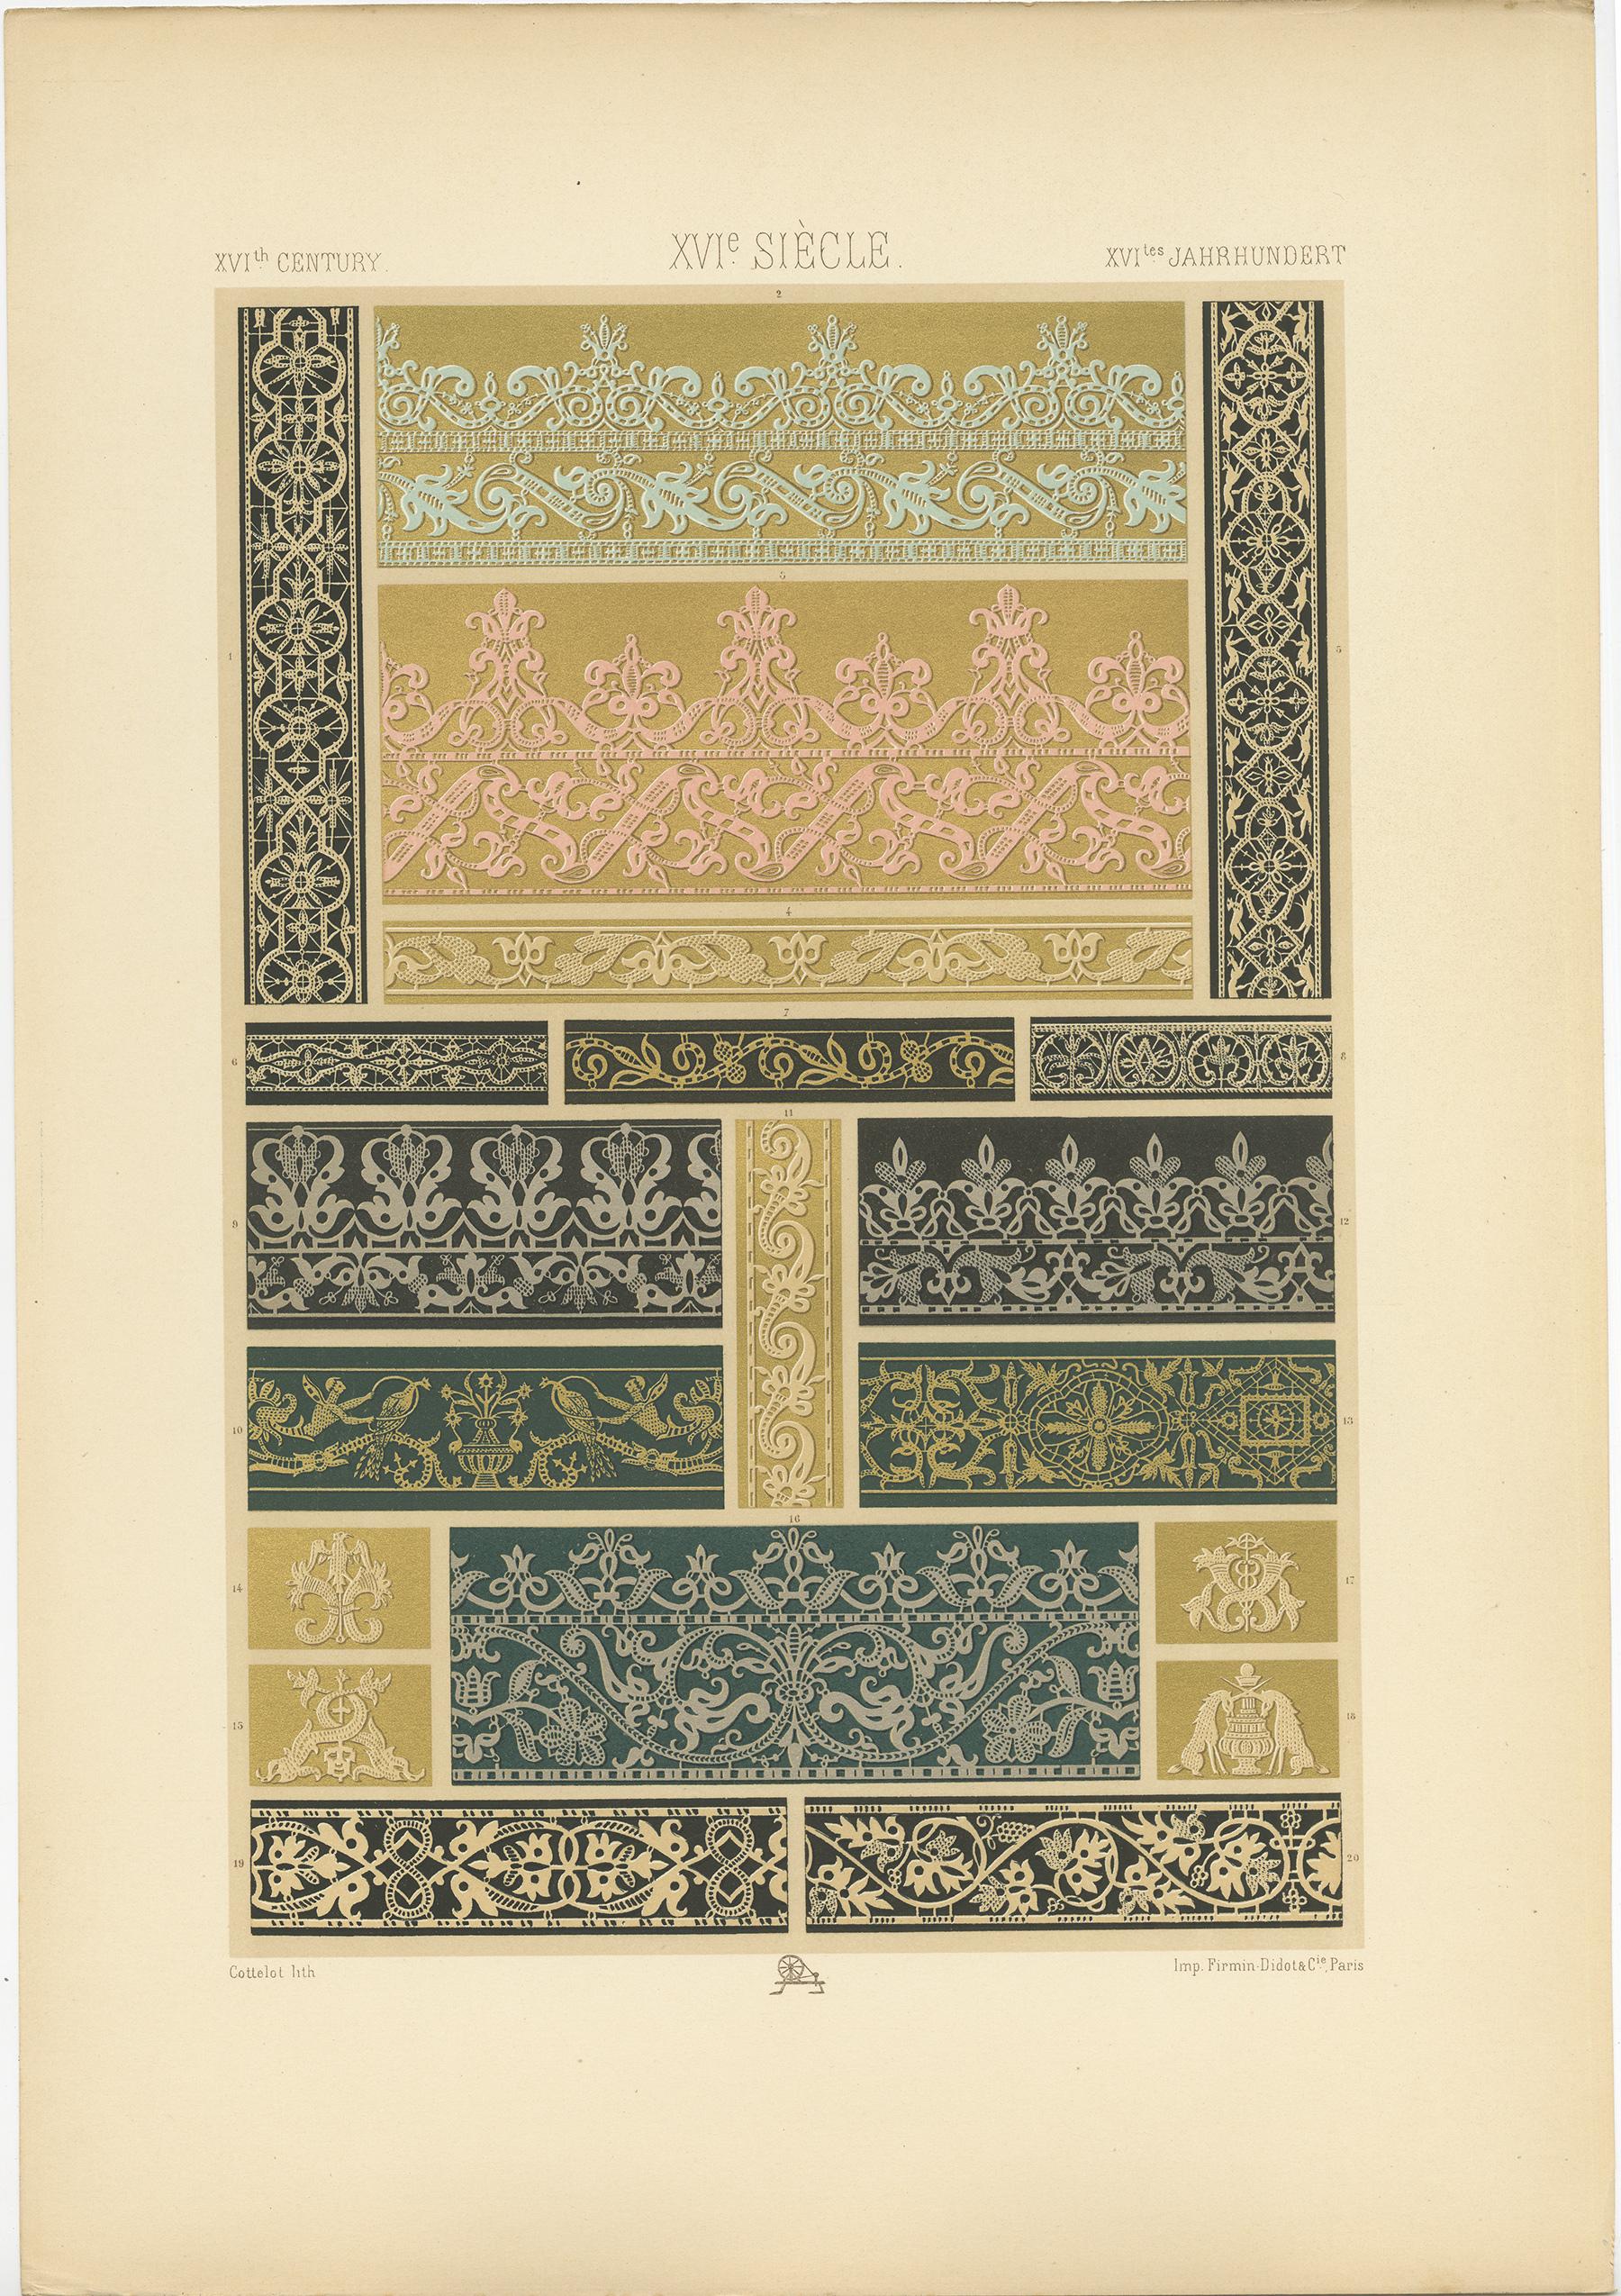 Antique print titled '16th Century - XVIc Siècle - XVILes Jahrhundert'. Chromolithograph of lace motifs from a volume published in Liege in 1597 ornaments. This print originates from 'l'Ornement Polychrome' by Auguste Racinet. Published circa 1890.